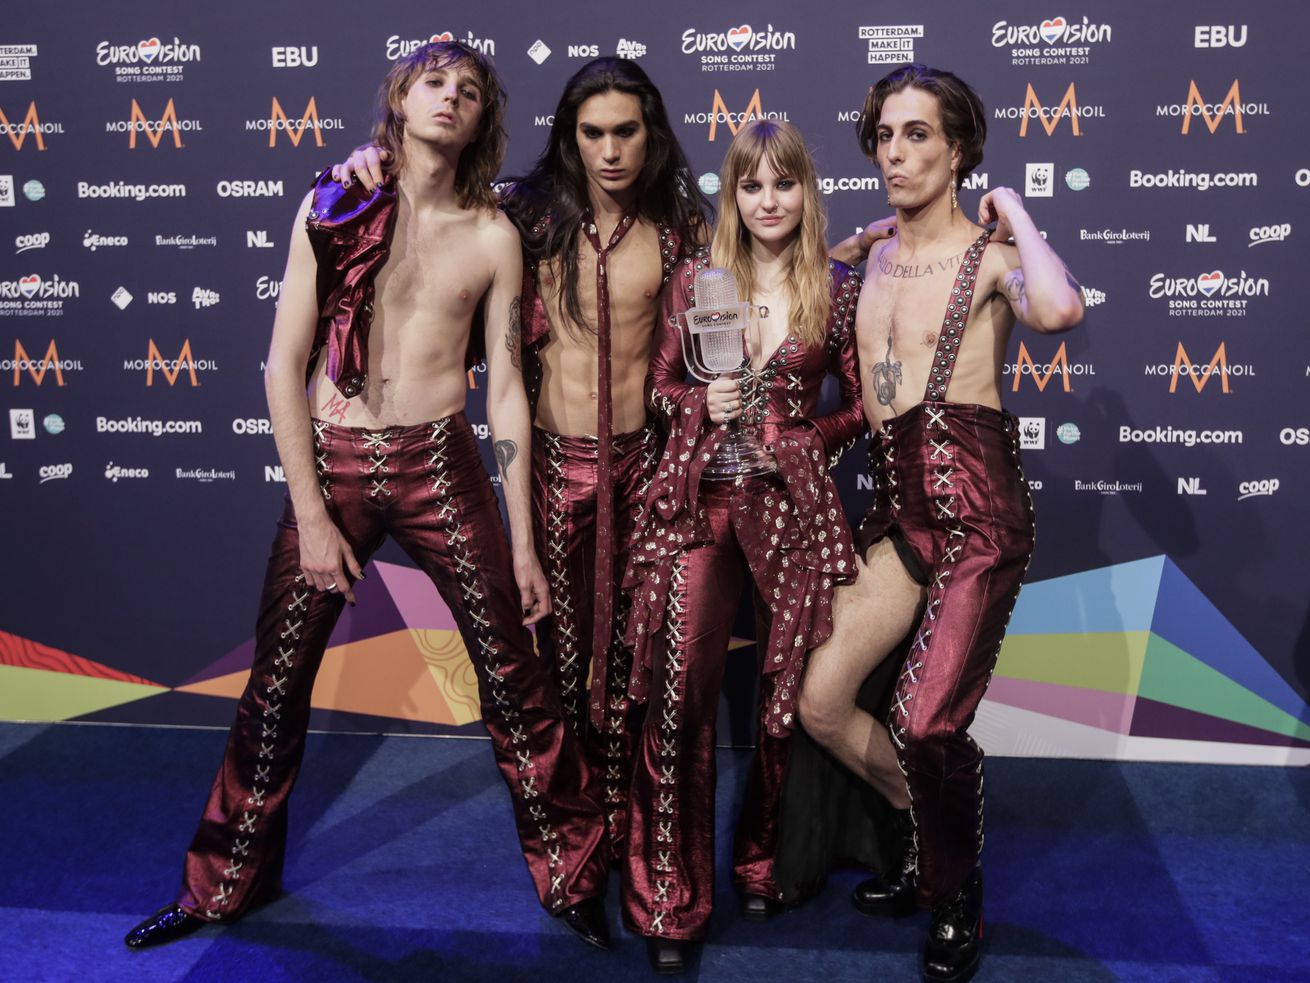 Maneskin — Thomas Raggi (from left), Ethan Torchio, Victoria De Angelis and Damiano David — pose for photographers with the trophy after winning the Grand Final of the Eurovision Song Contest at Ahoy arena in Rotterdam, Netherlands, on Saturday. 